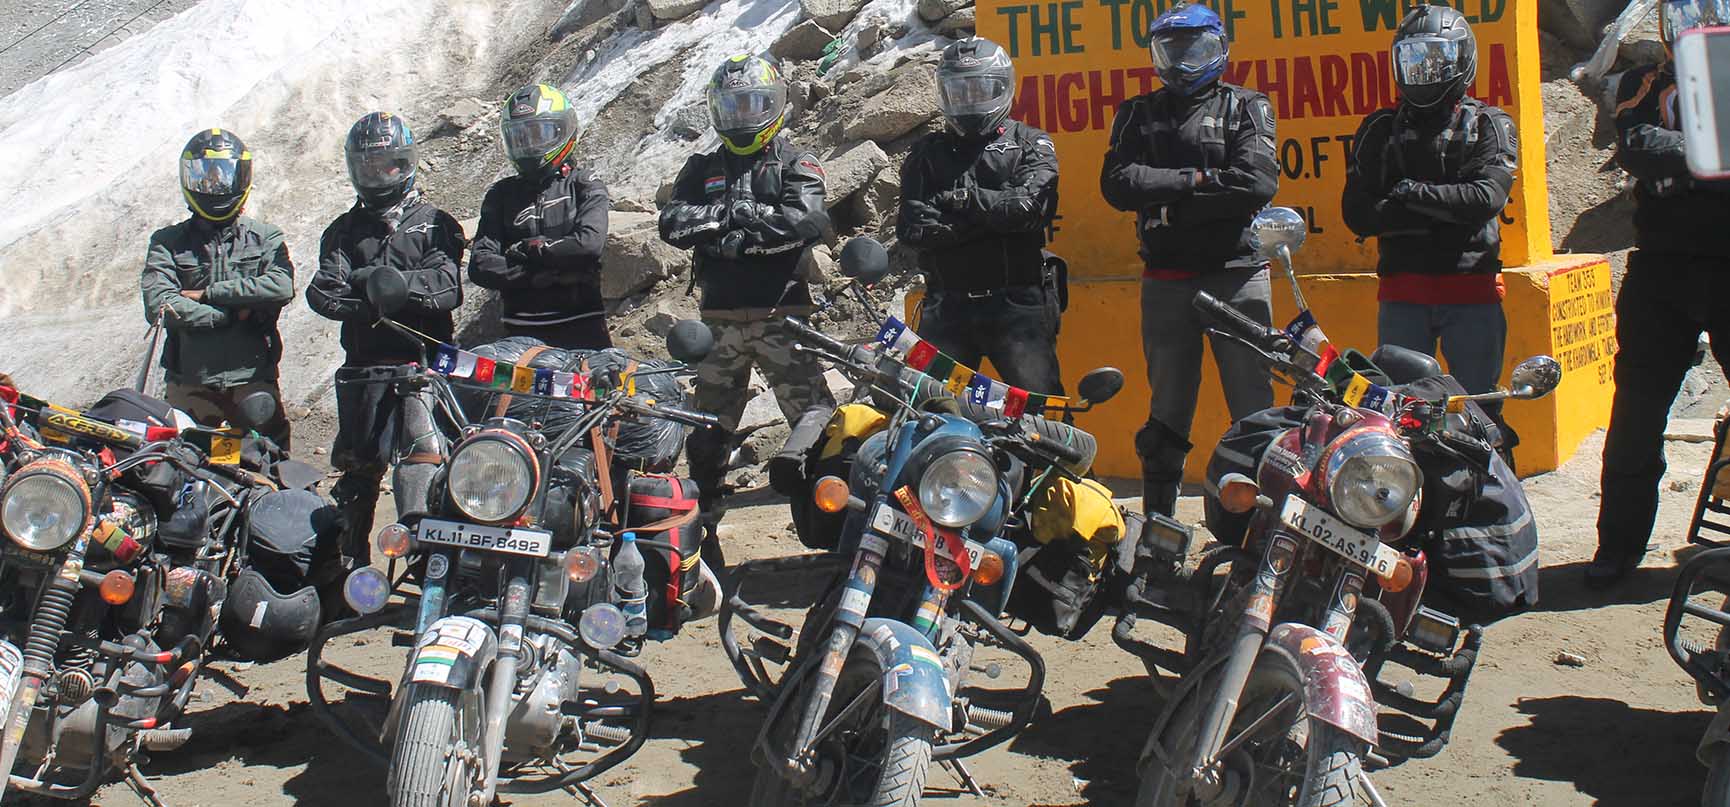 leh bike ride - fun place to hanging out with friends in india